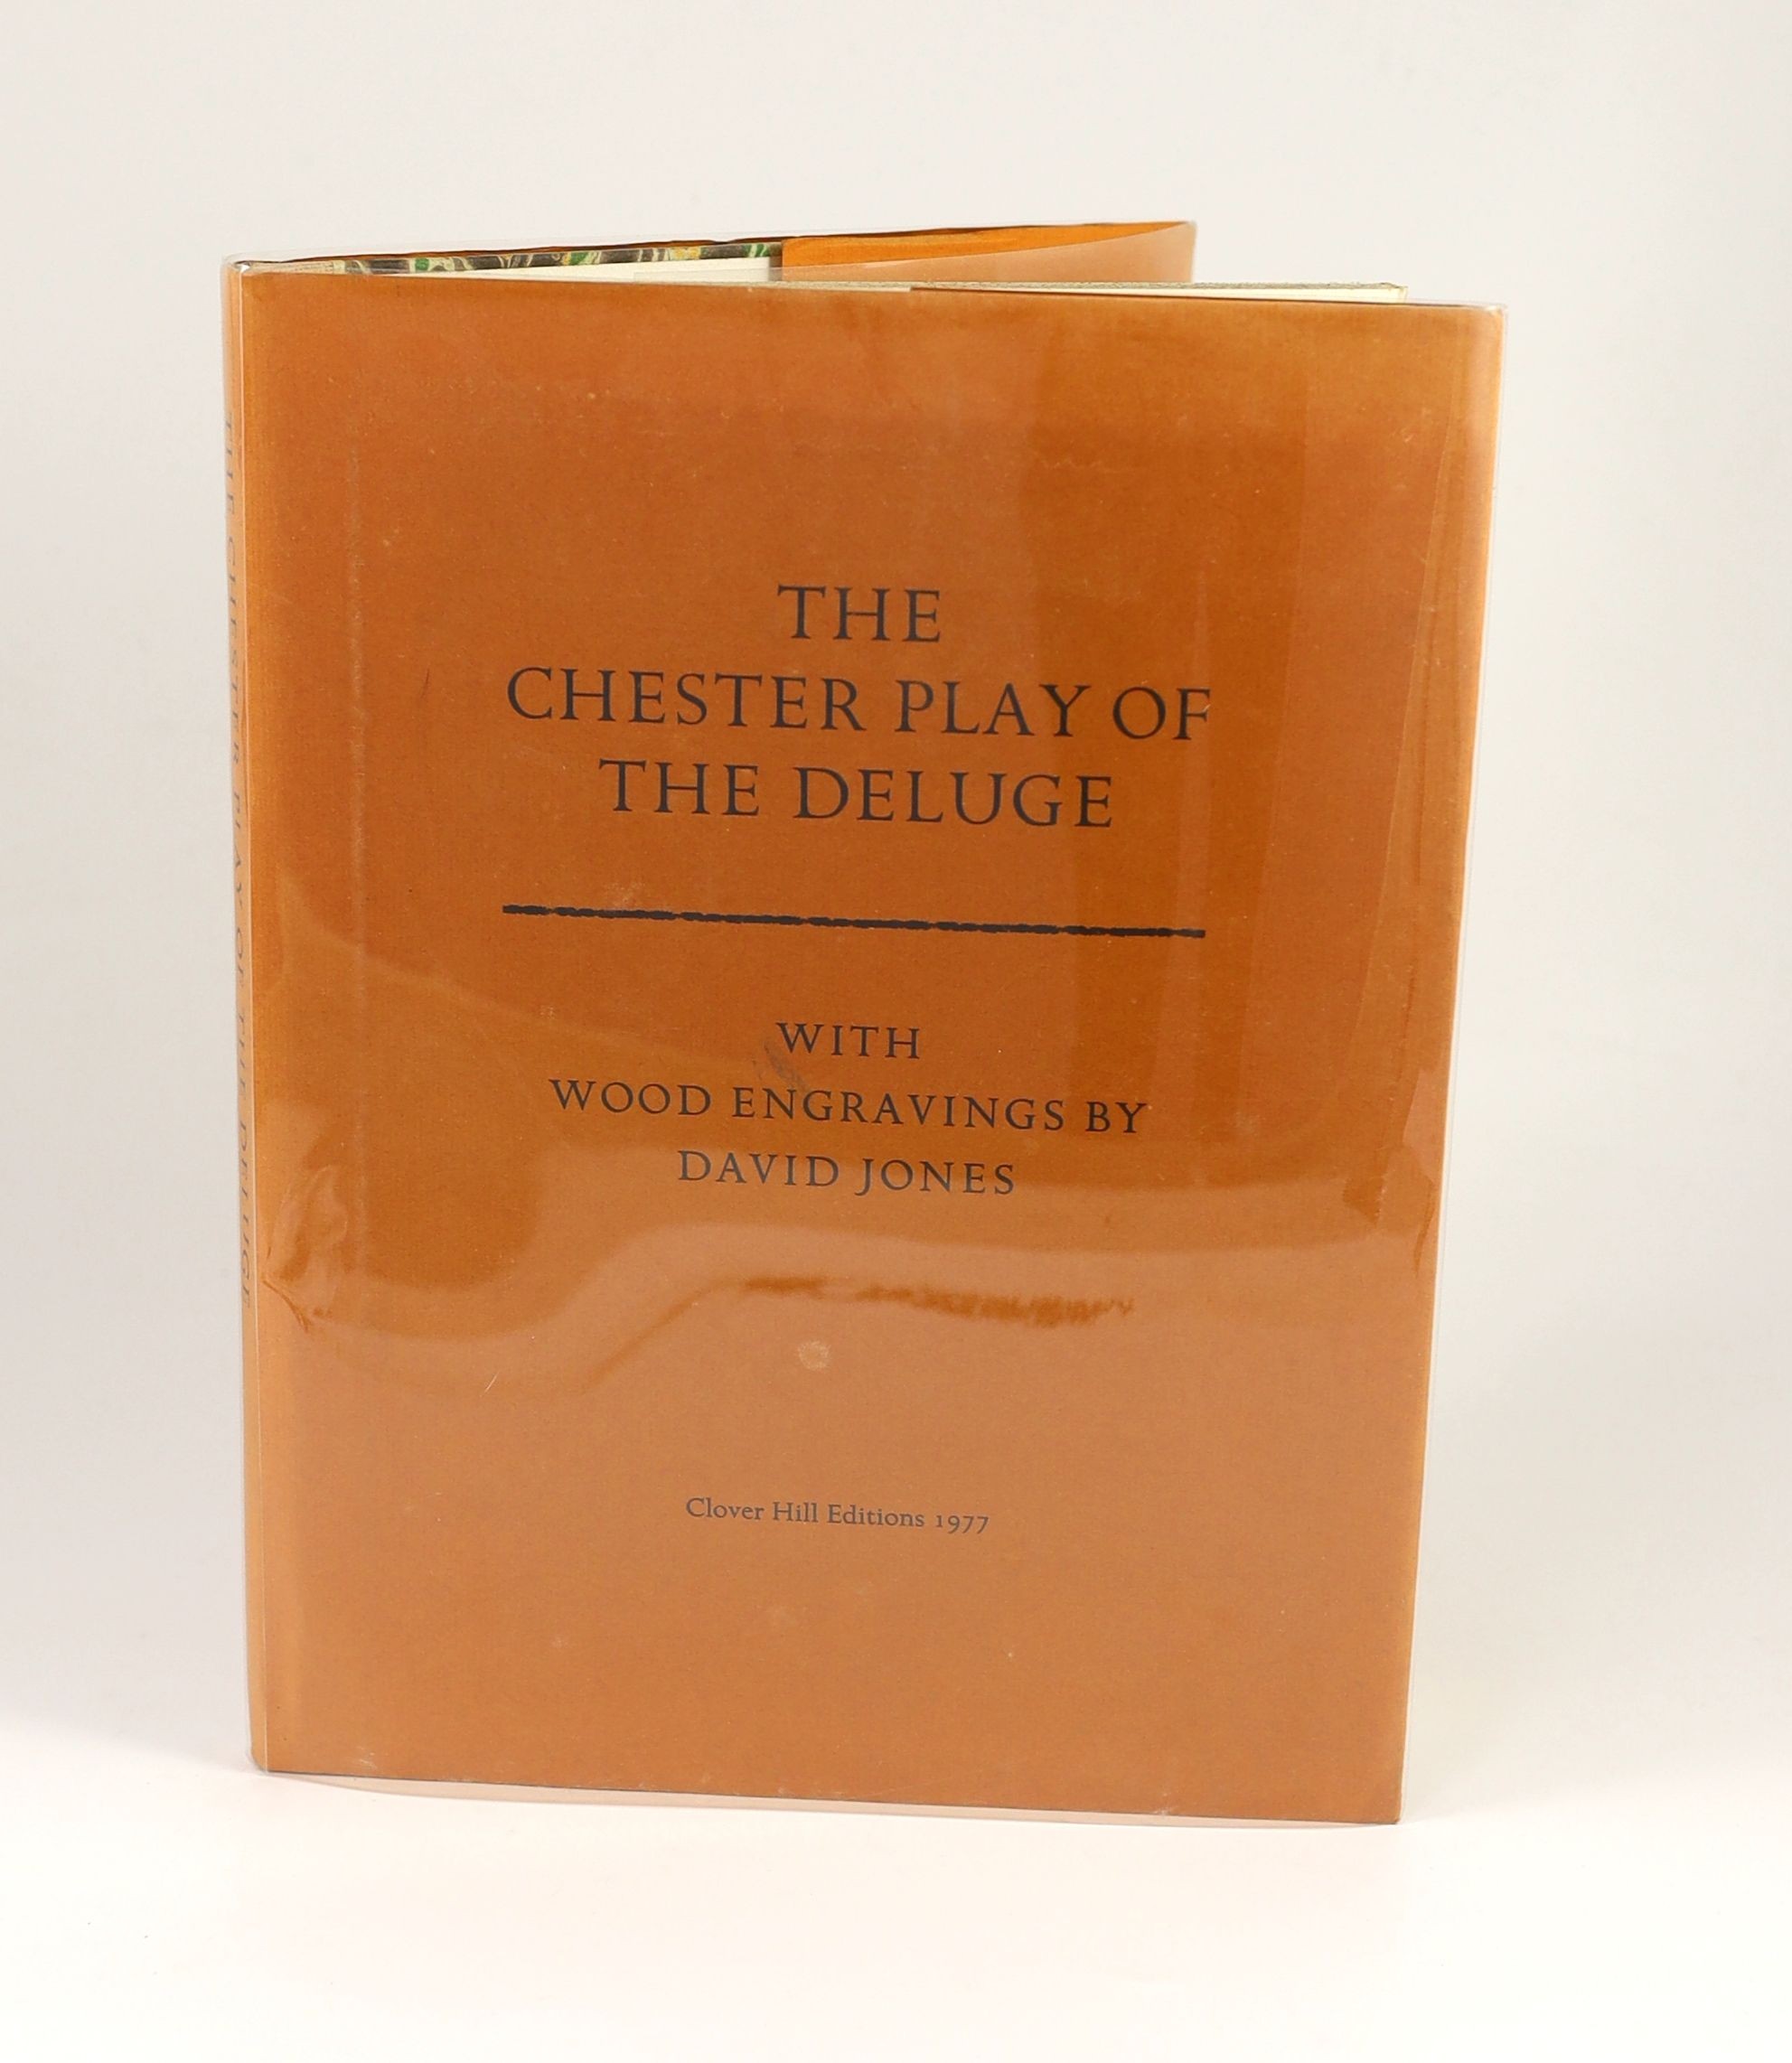 Jones, David - The Chester Plays of the Deluge. Limited edition, No. 230 of the 250 ‘ordinary copies’. Complete with 10 wood engravings in the text. Quarter cloth and marbled paper with gilt title direct on spine. With o